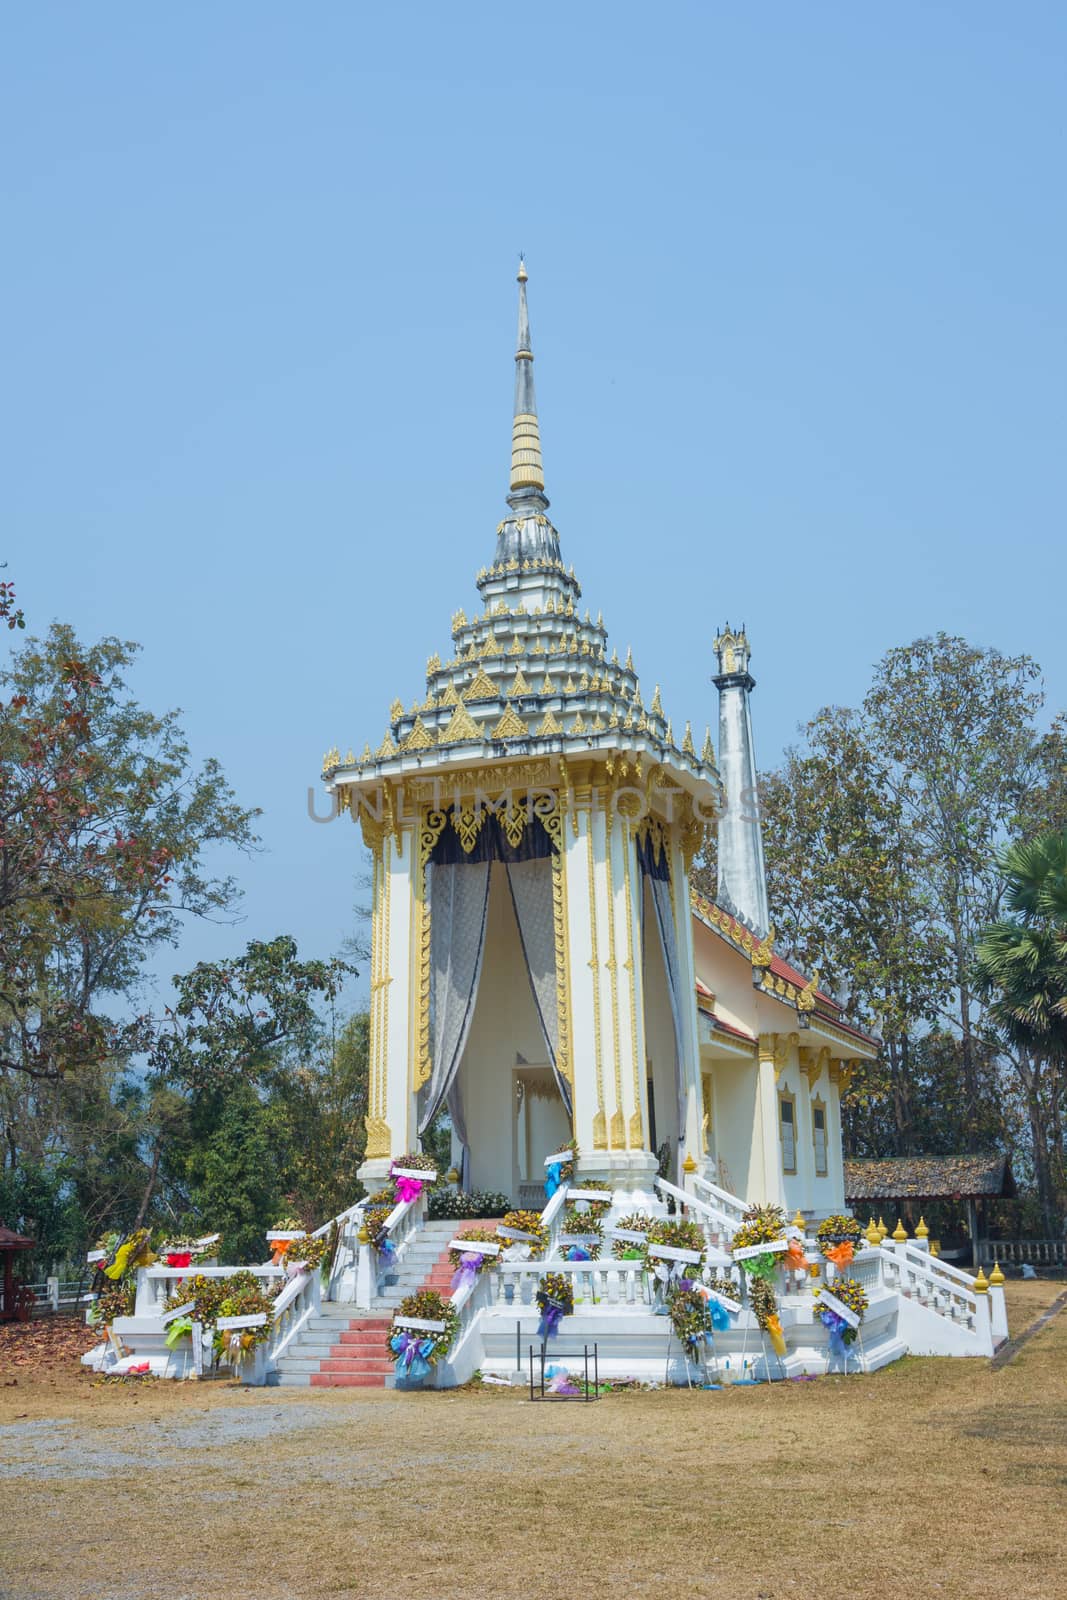 Thai style crematory with wreaths on blue sky background